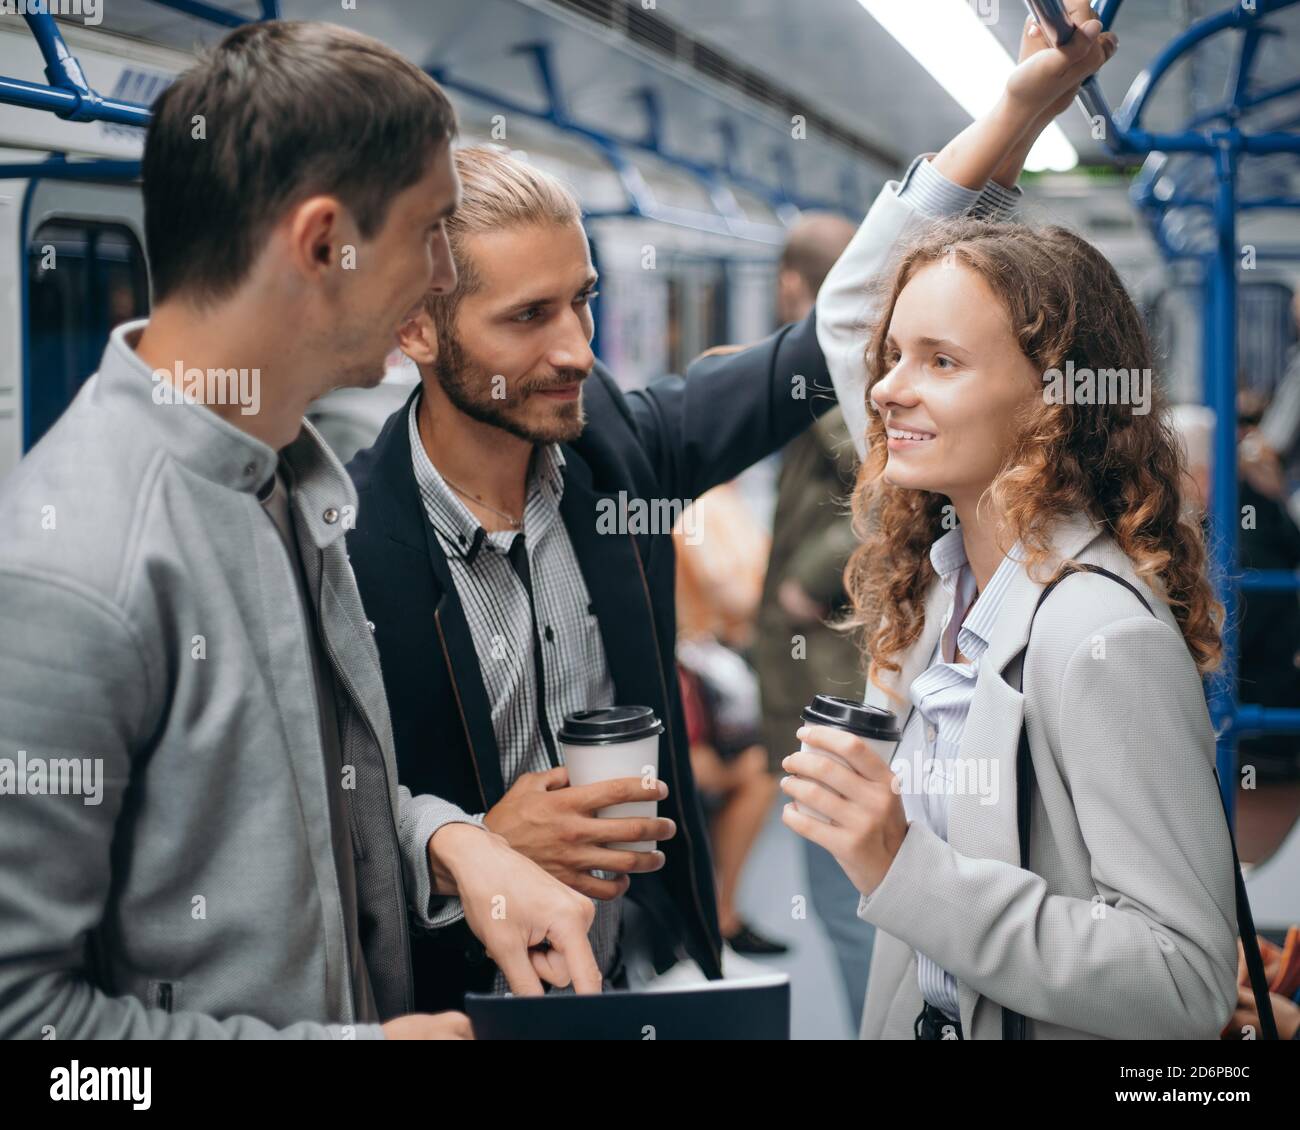 group of students discussing something in the subway car. Stock Photo